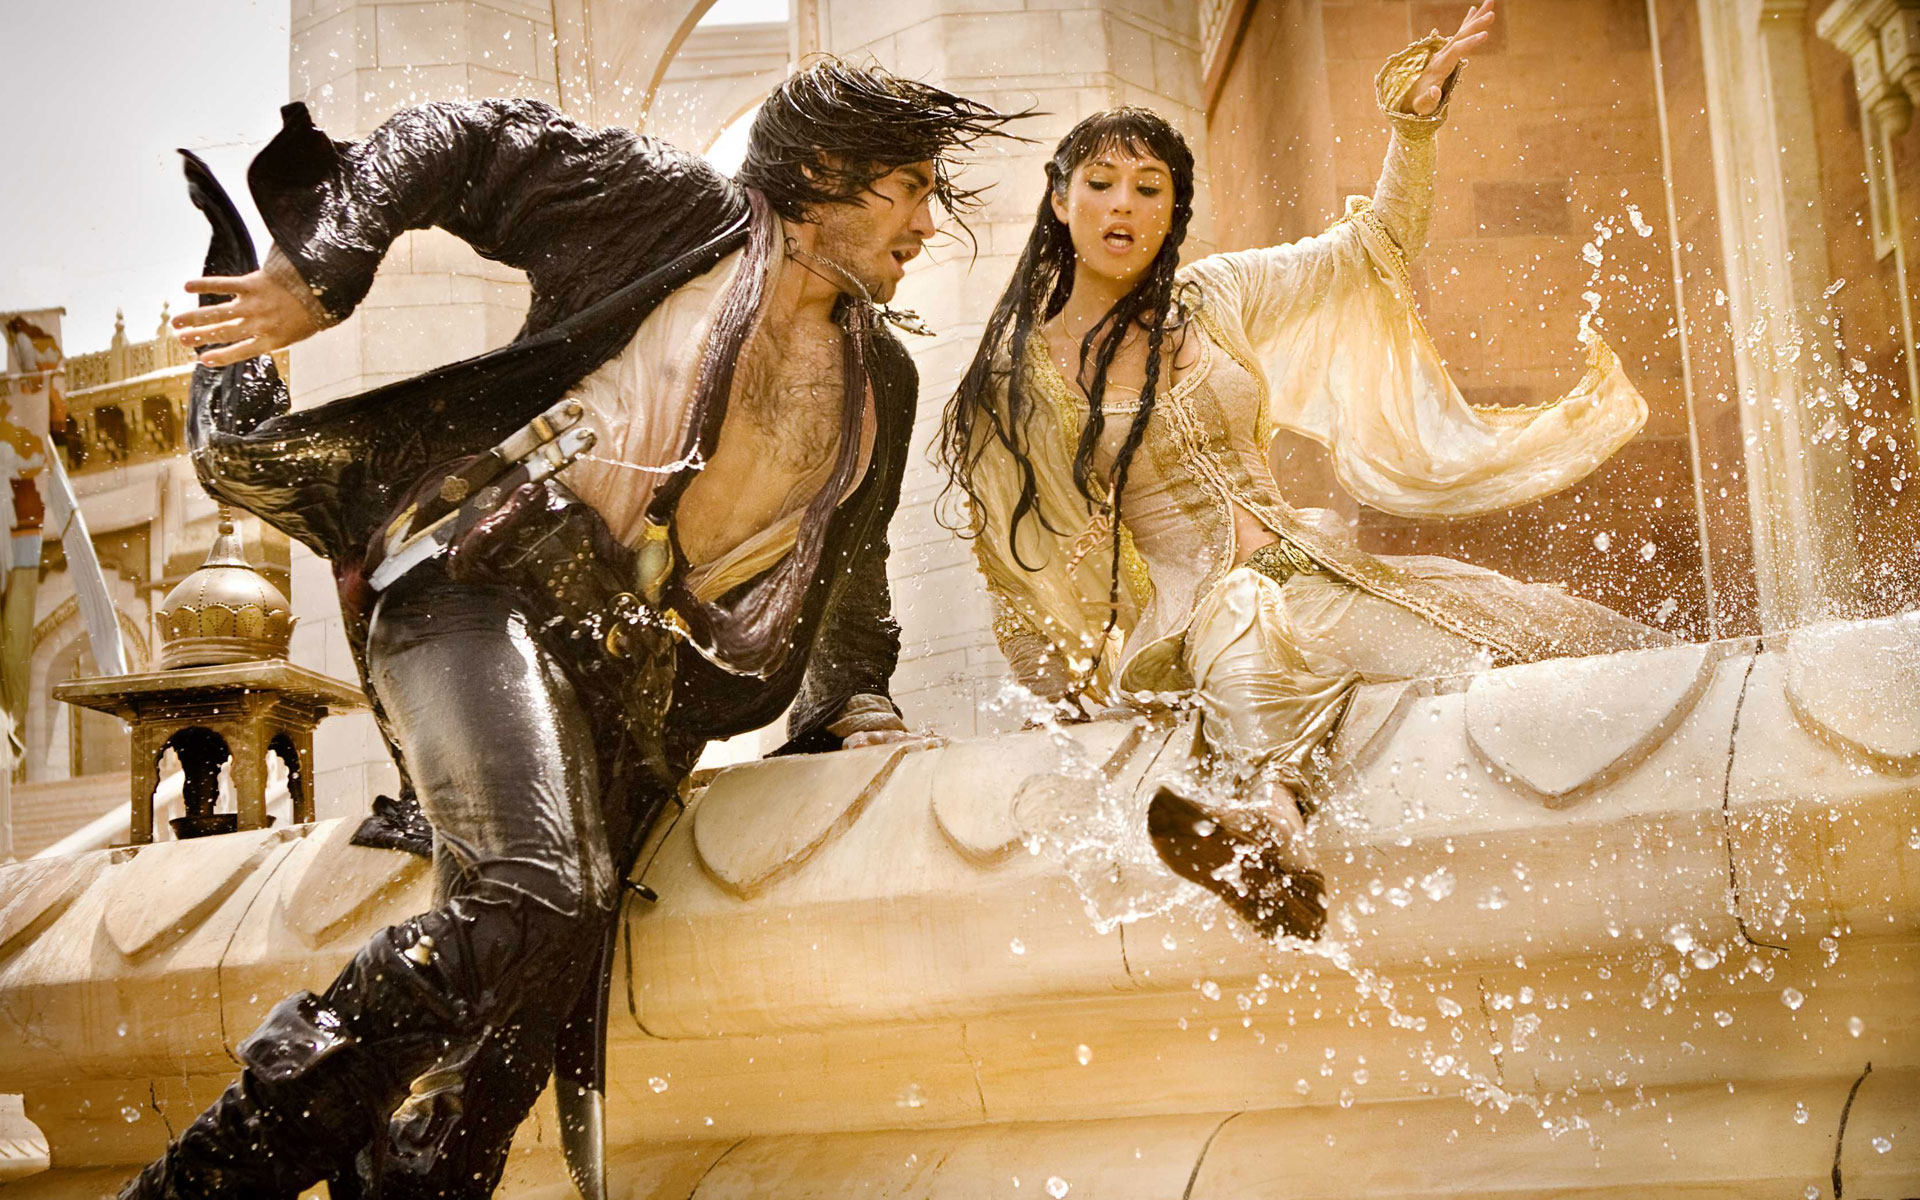 Prince Of Persia: The Sands Of Time Wallpapers